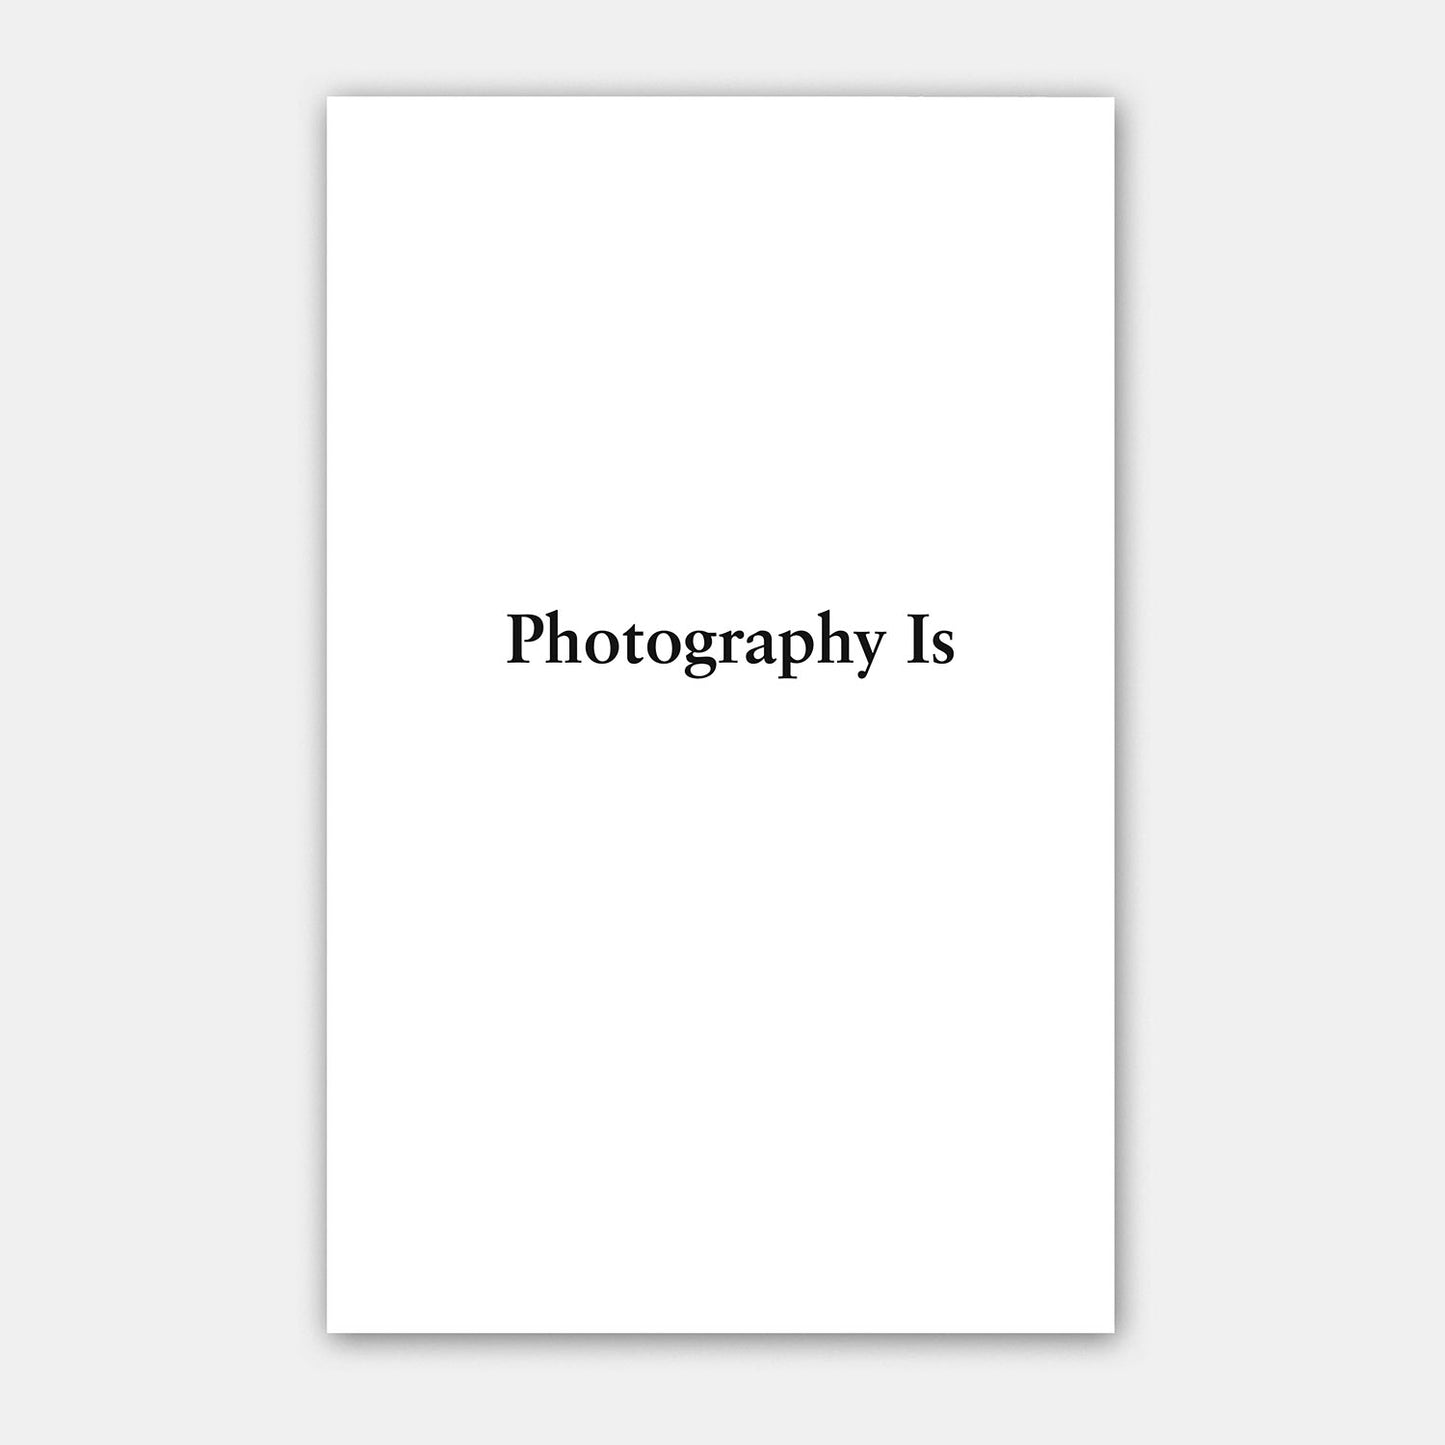 Photography Is